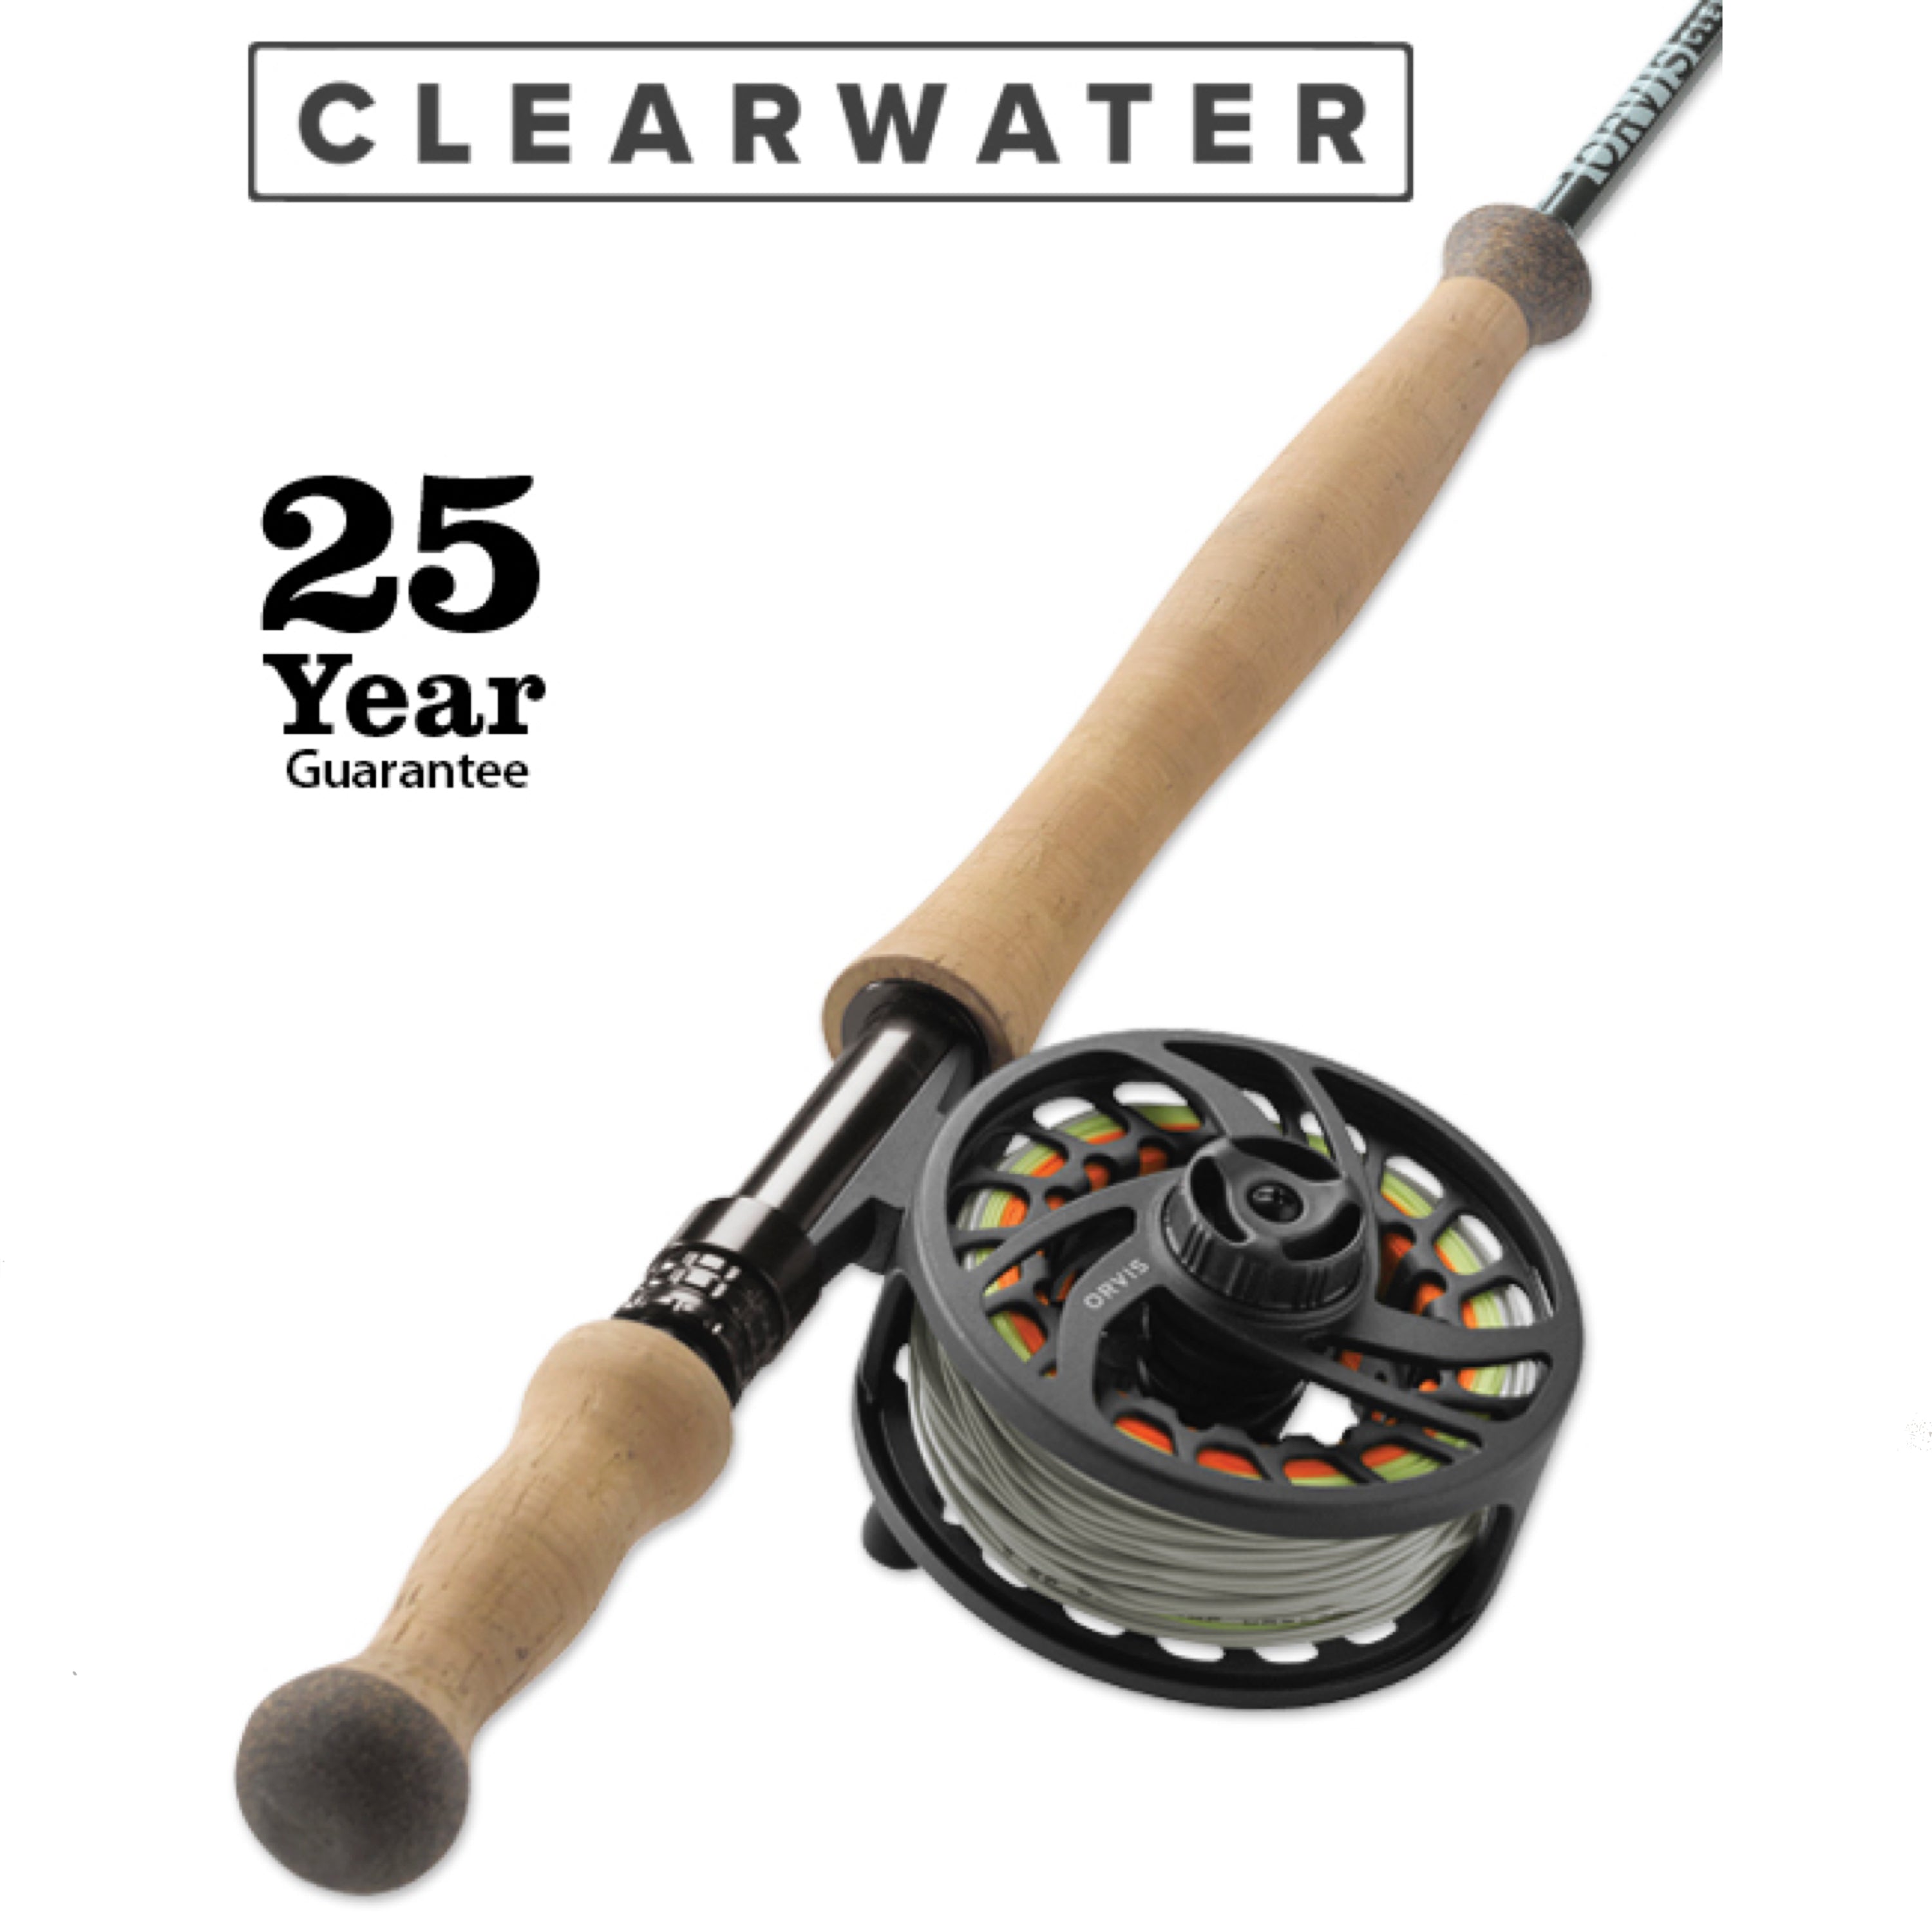 Orvis Clearwater Switch/Spey Fly Rods | Mossy Creek Fly Fishing